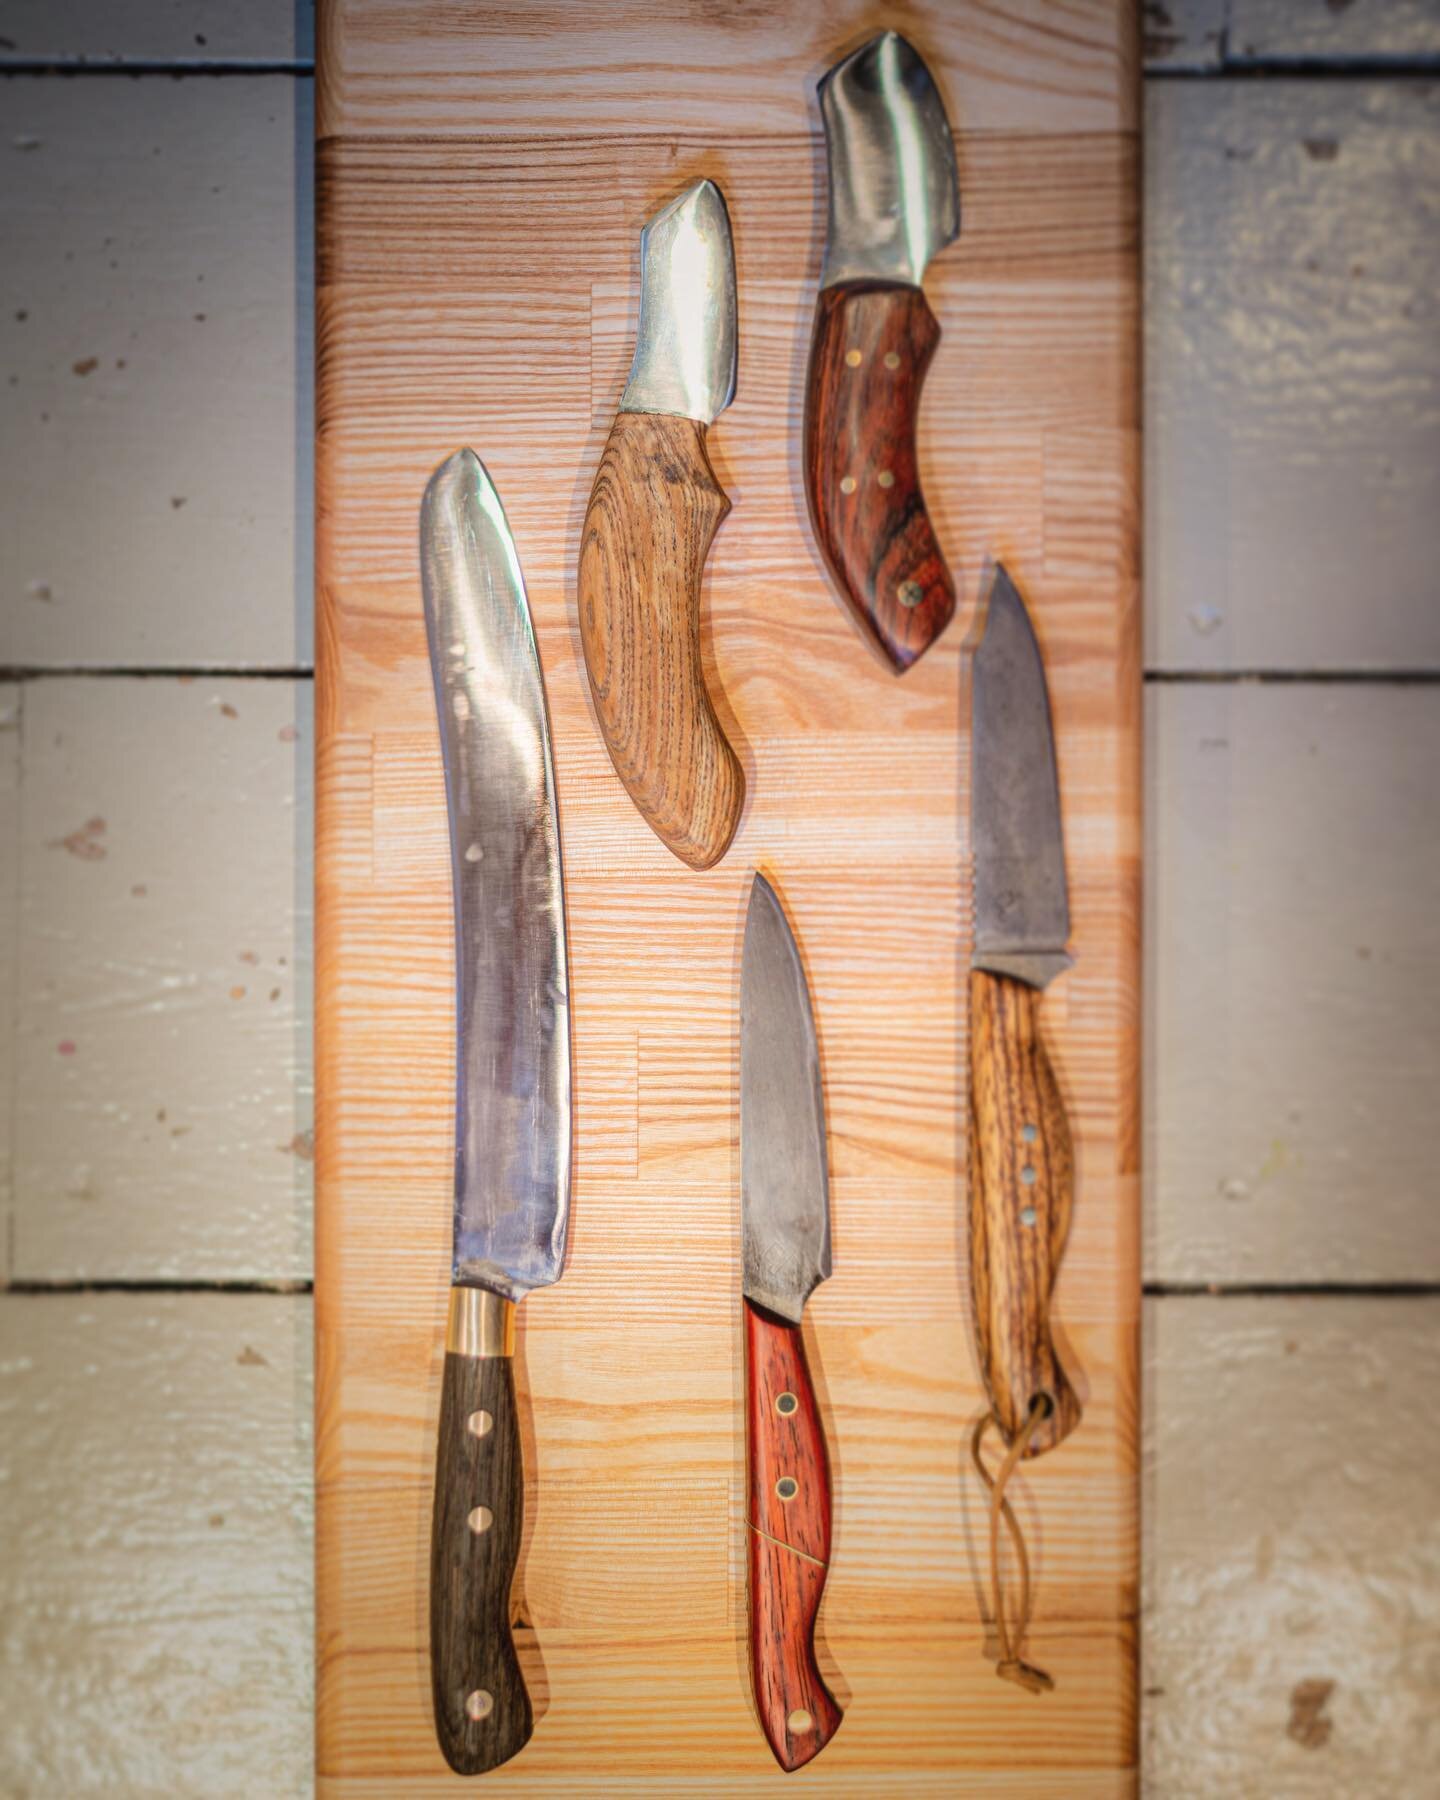 New Year, New Knife Sale - 5 new pieces for sale, all limited editions 1 of 1. Prices from &pound;90, DM me for details.
.
Bread/carving knife - full tang stainless steel, and ancient bog oak and brass handle with custom mosaic pin
.
Garden Knife 2.0